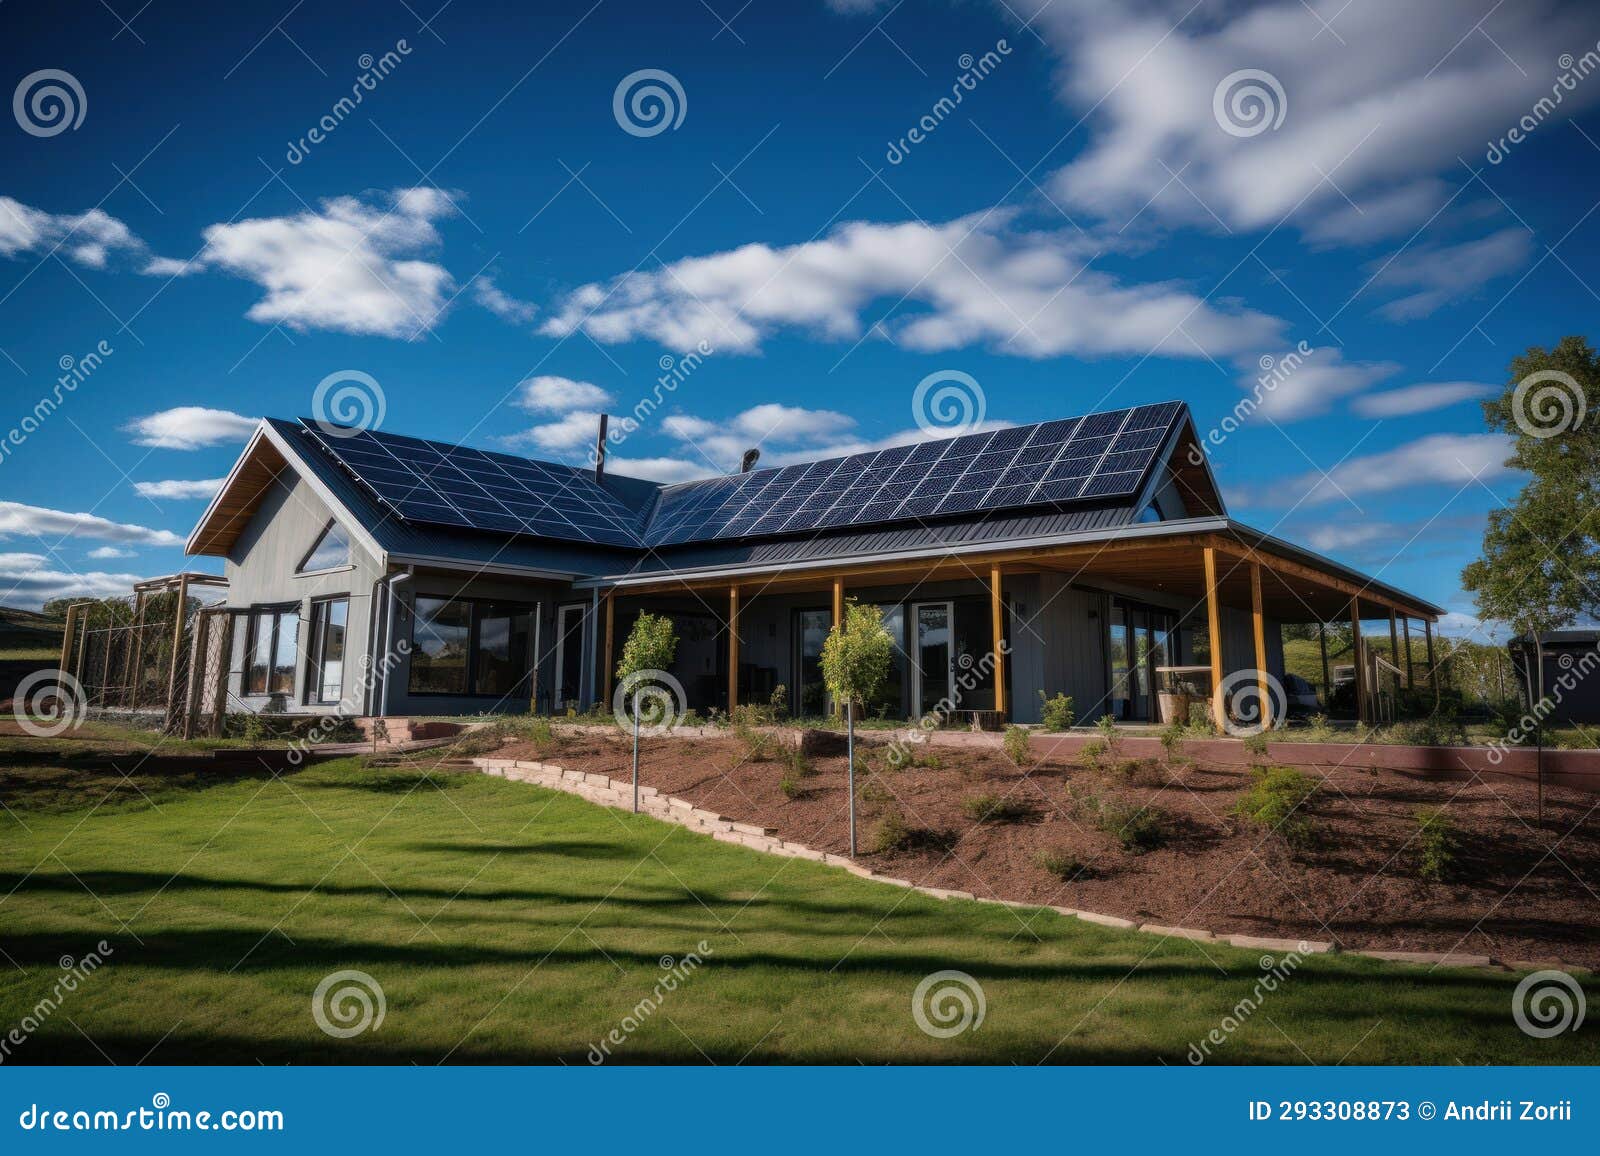 solar panels on roof of the house renewable energy